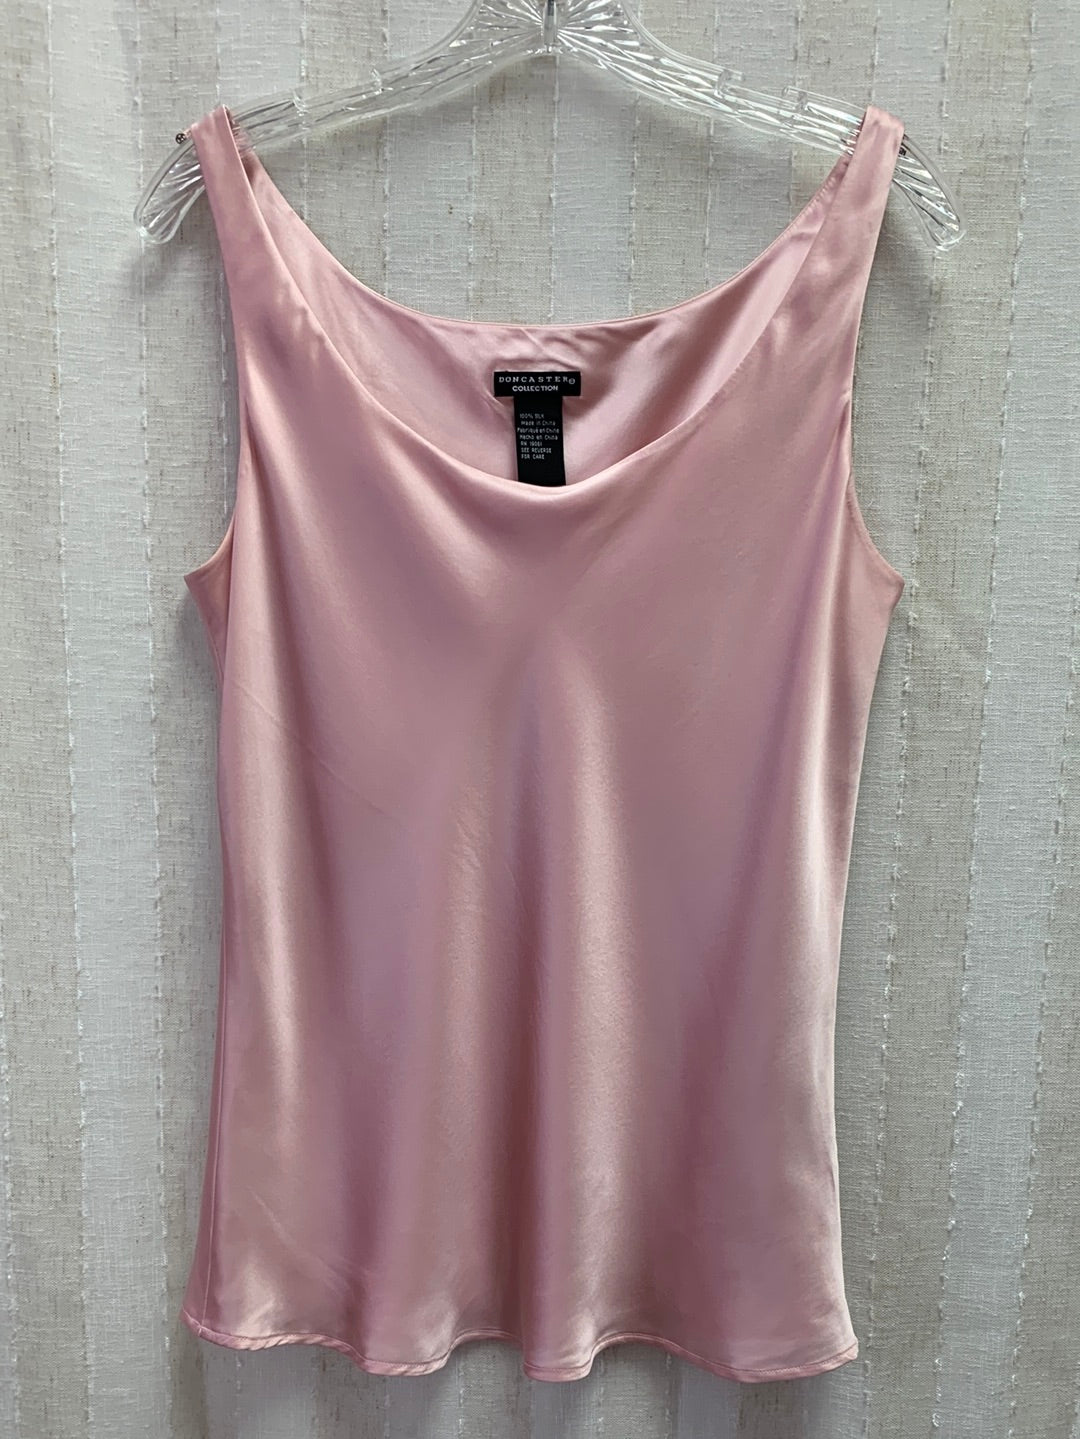 DONCASTER pink 100% Silk Sleeveless Blouse / Cami - 12